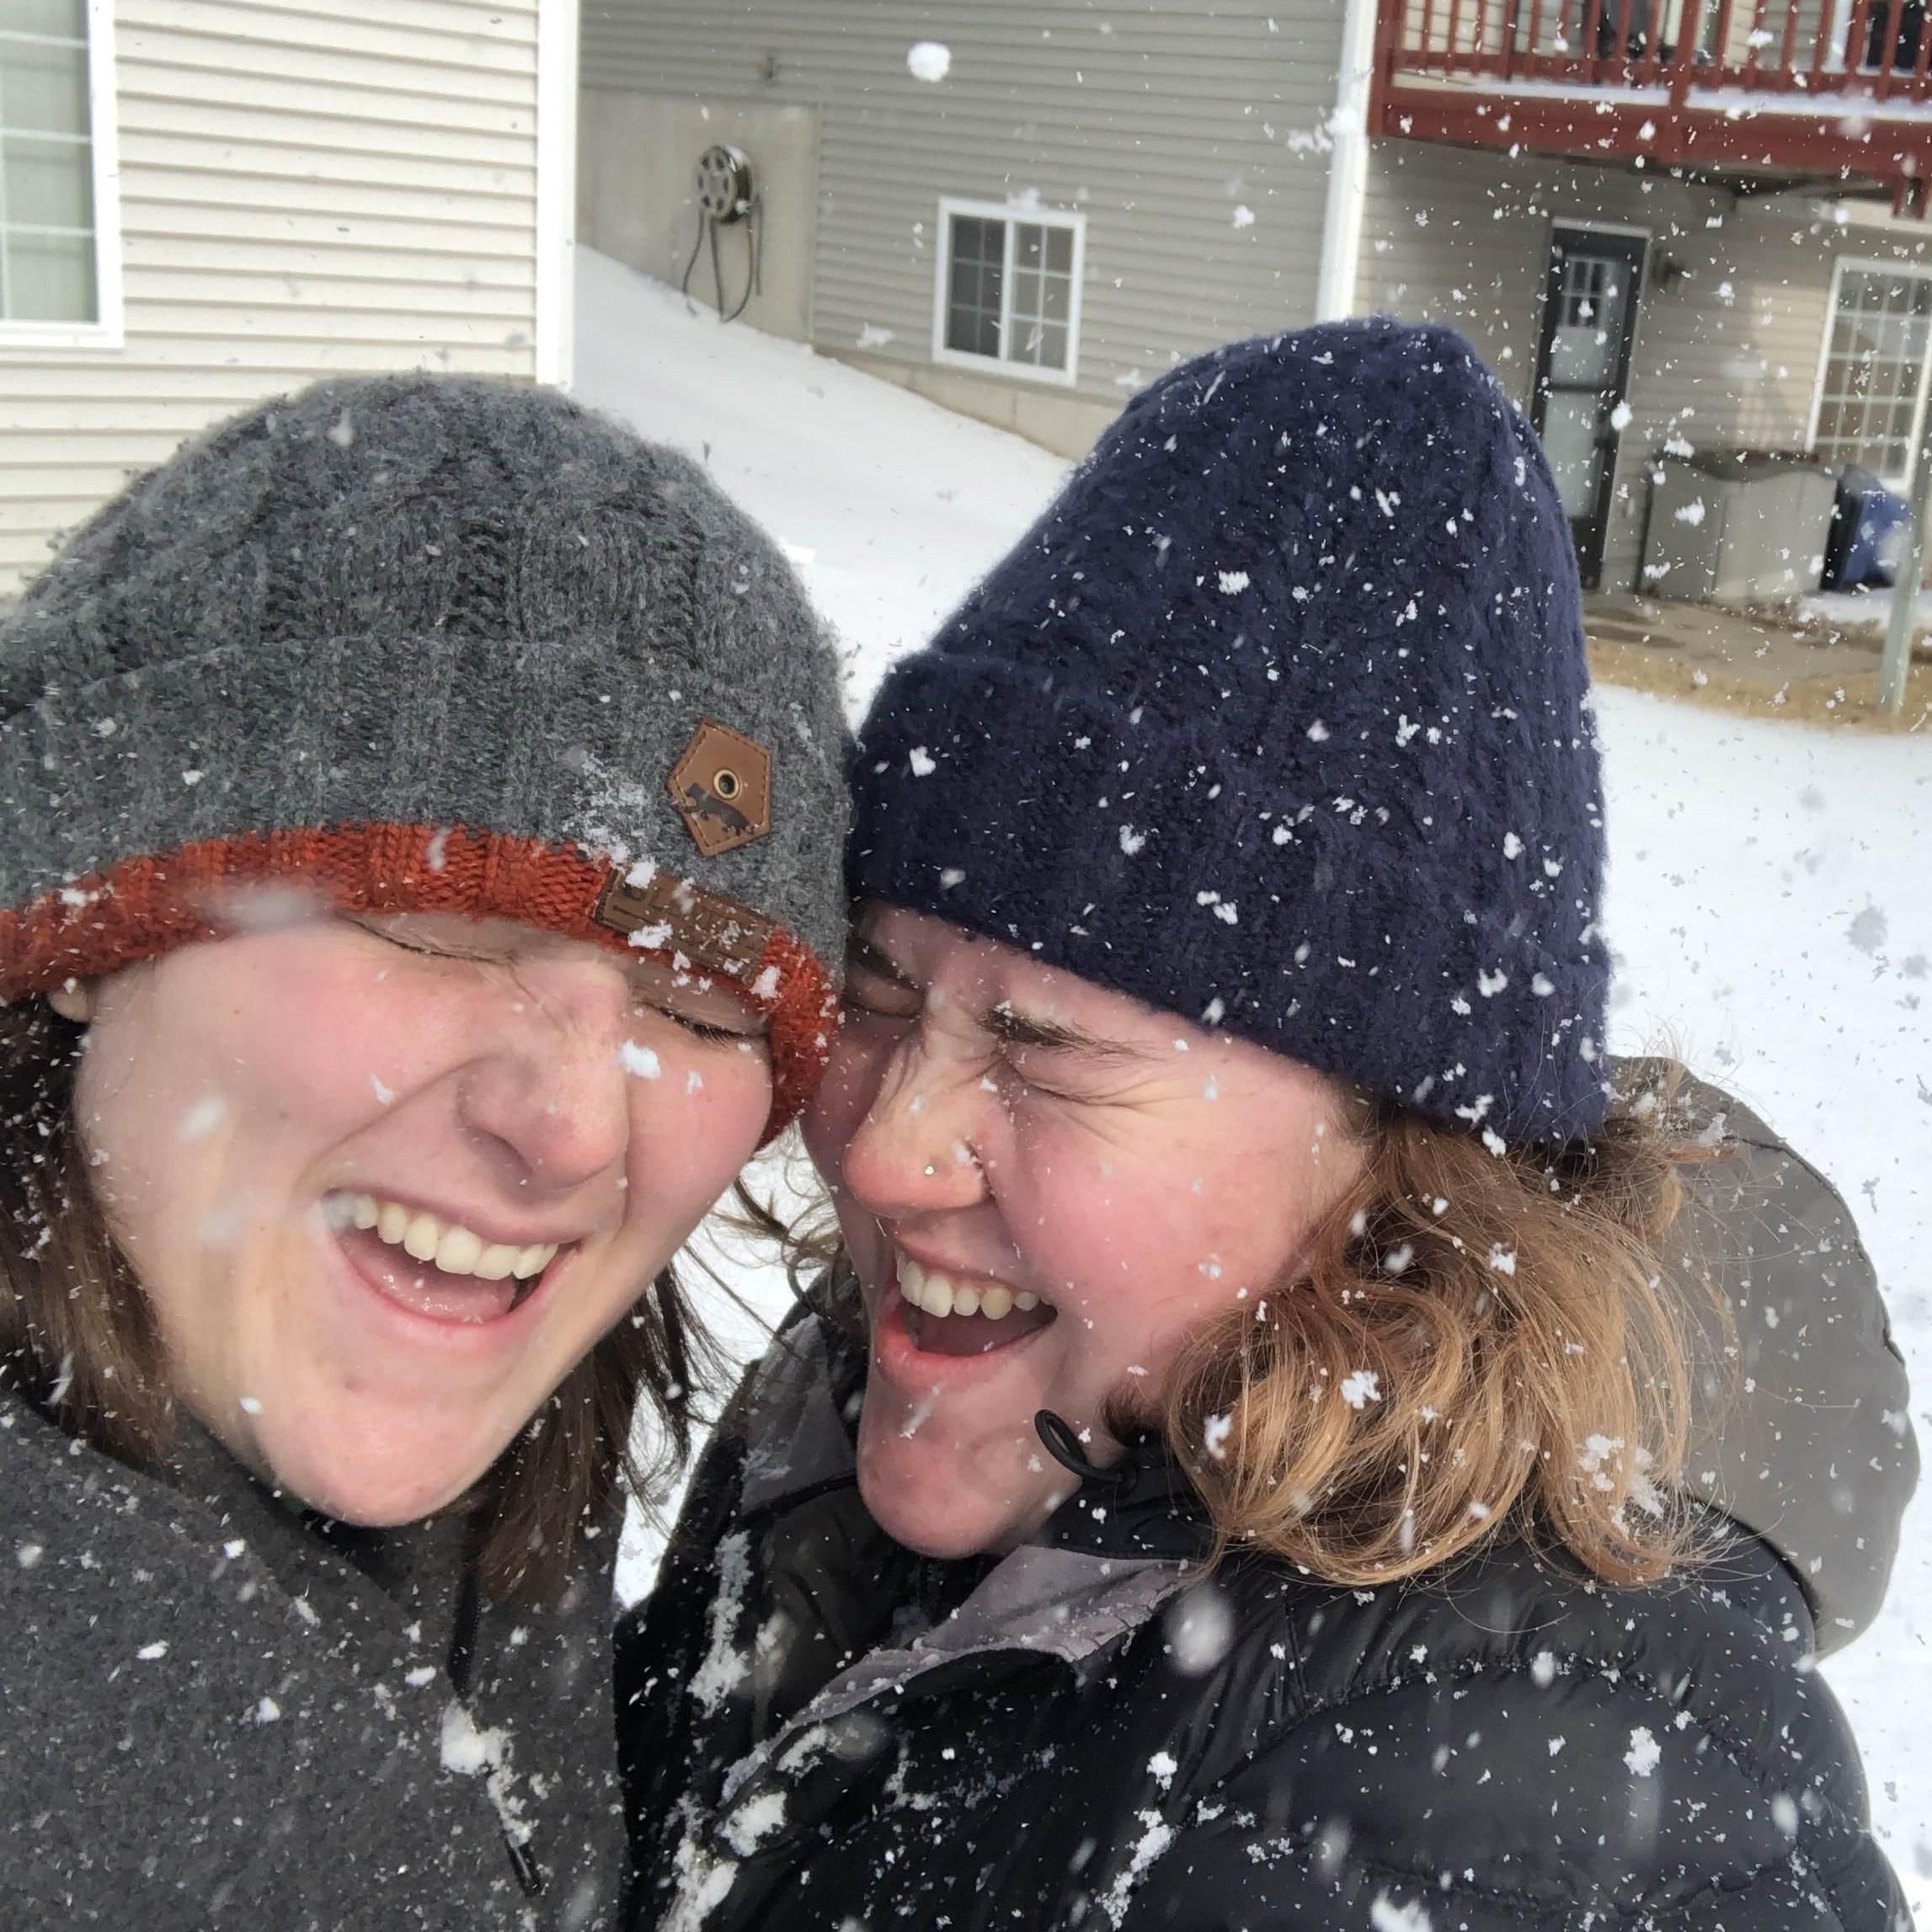 Quentin and Maryellen decided to take a selfie mid-snowball fight with the Almeida cousins on a visit to Grandma Carmen and Uncle Armando.